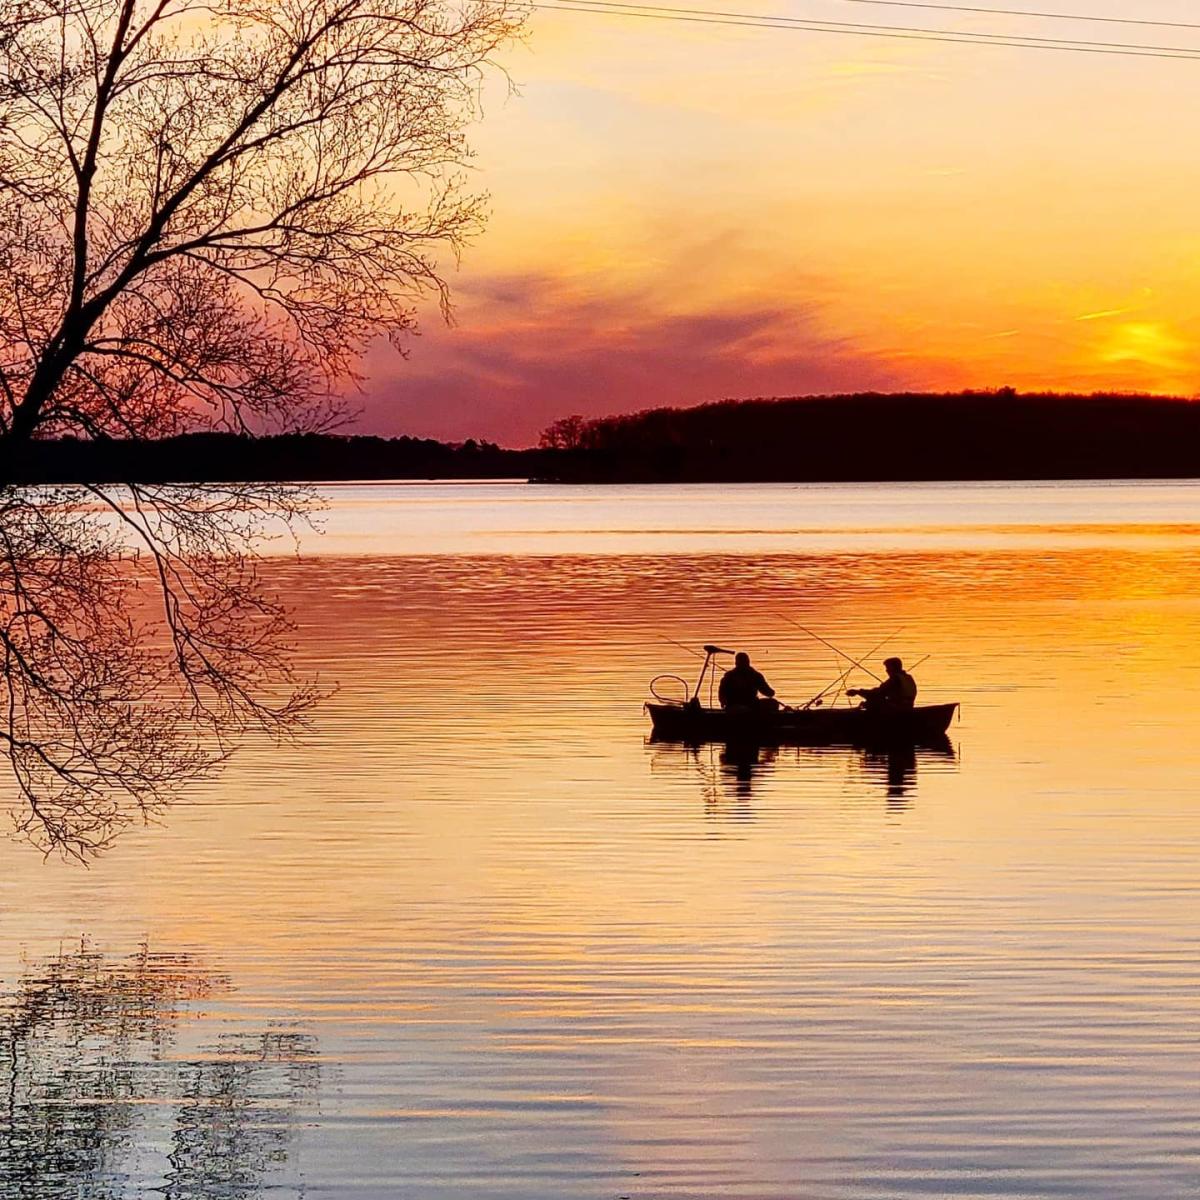 Fishing in a boat on the Wisconsin river at sunset